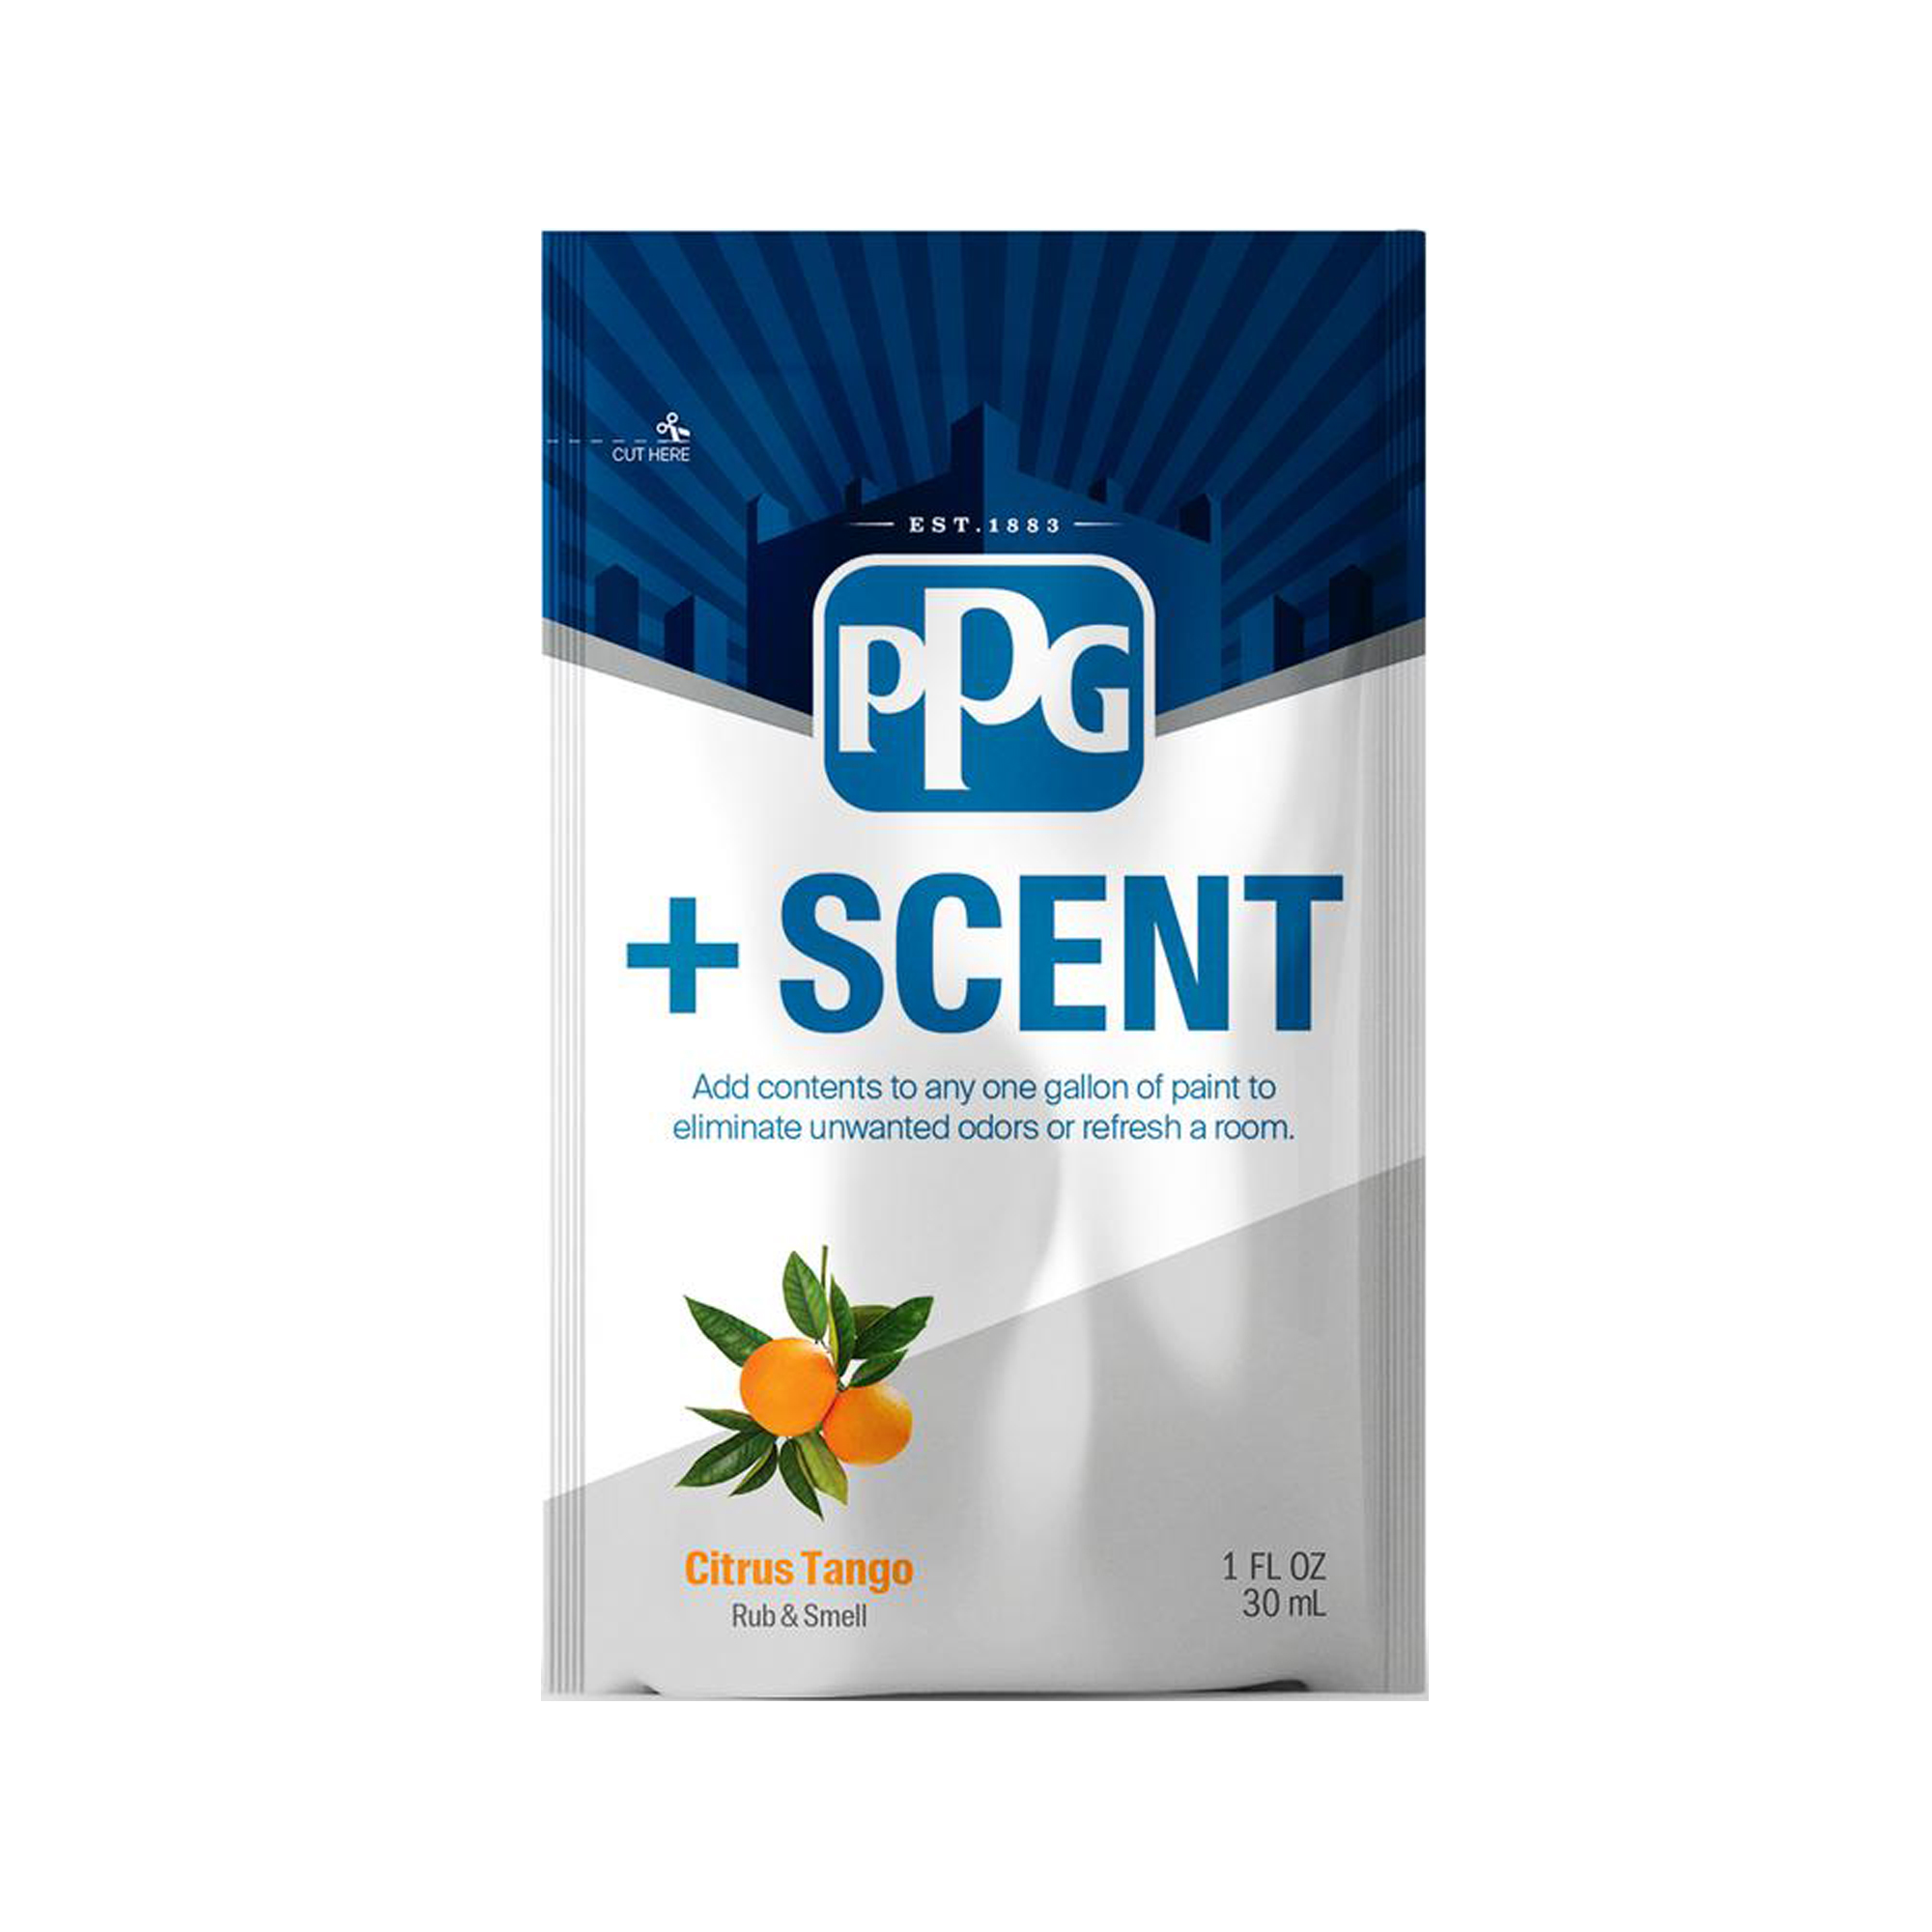 PPG +Scent